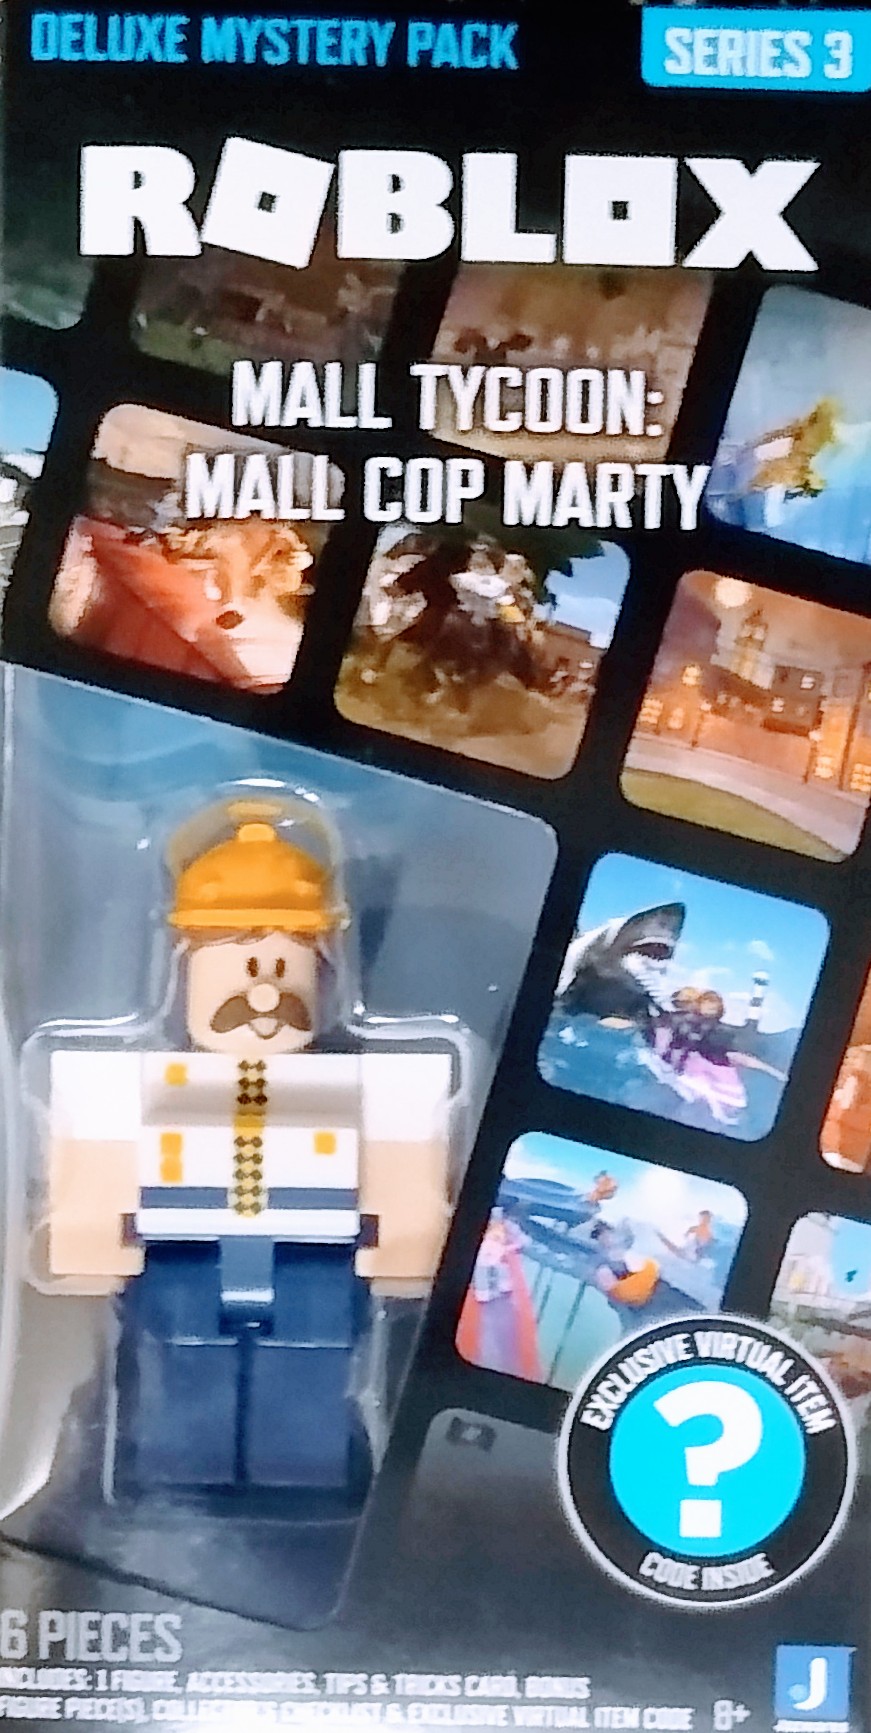  Roblox Action Collection - Mall Tycoon: Mall Cop Marty